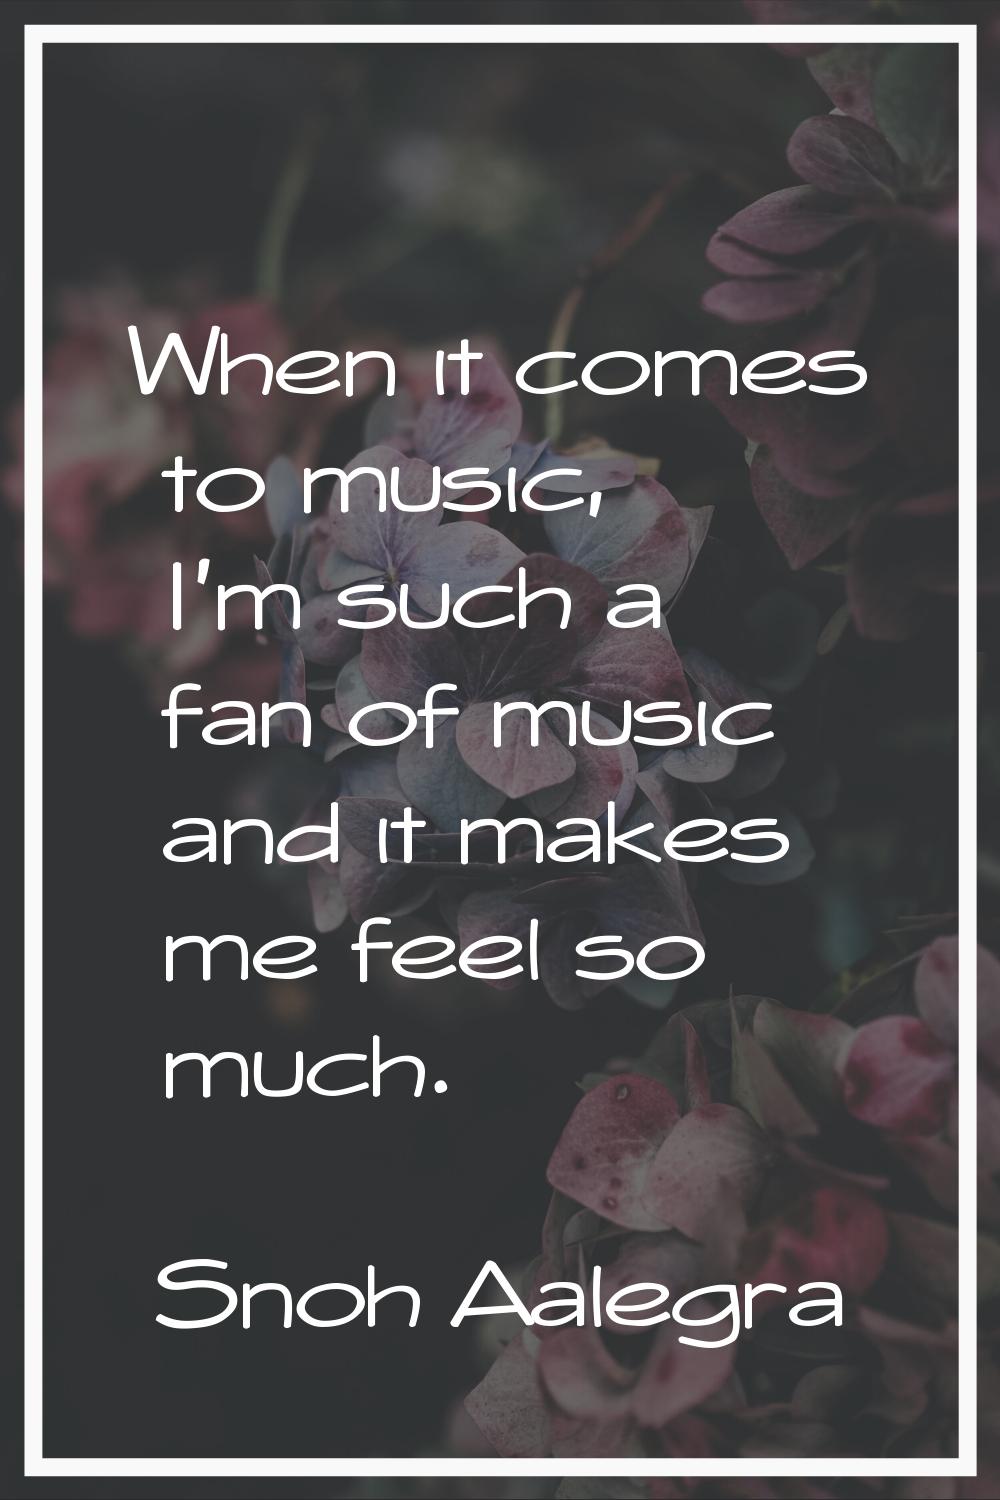 When it comes to music, I'm such a fan of music and it makes me feel so much.